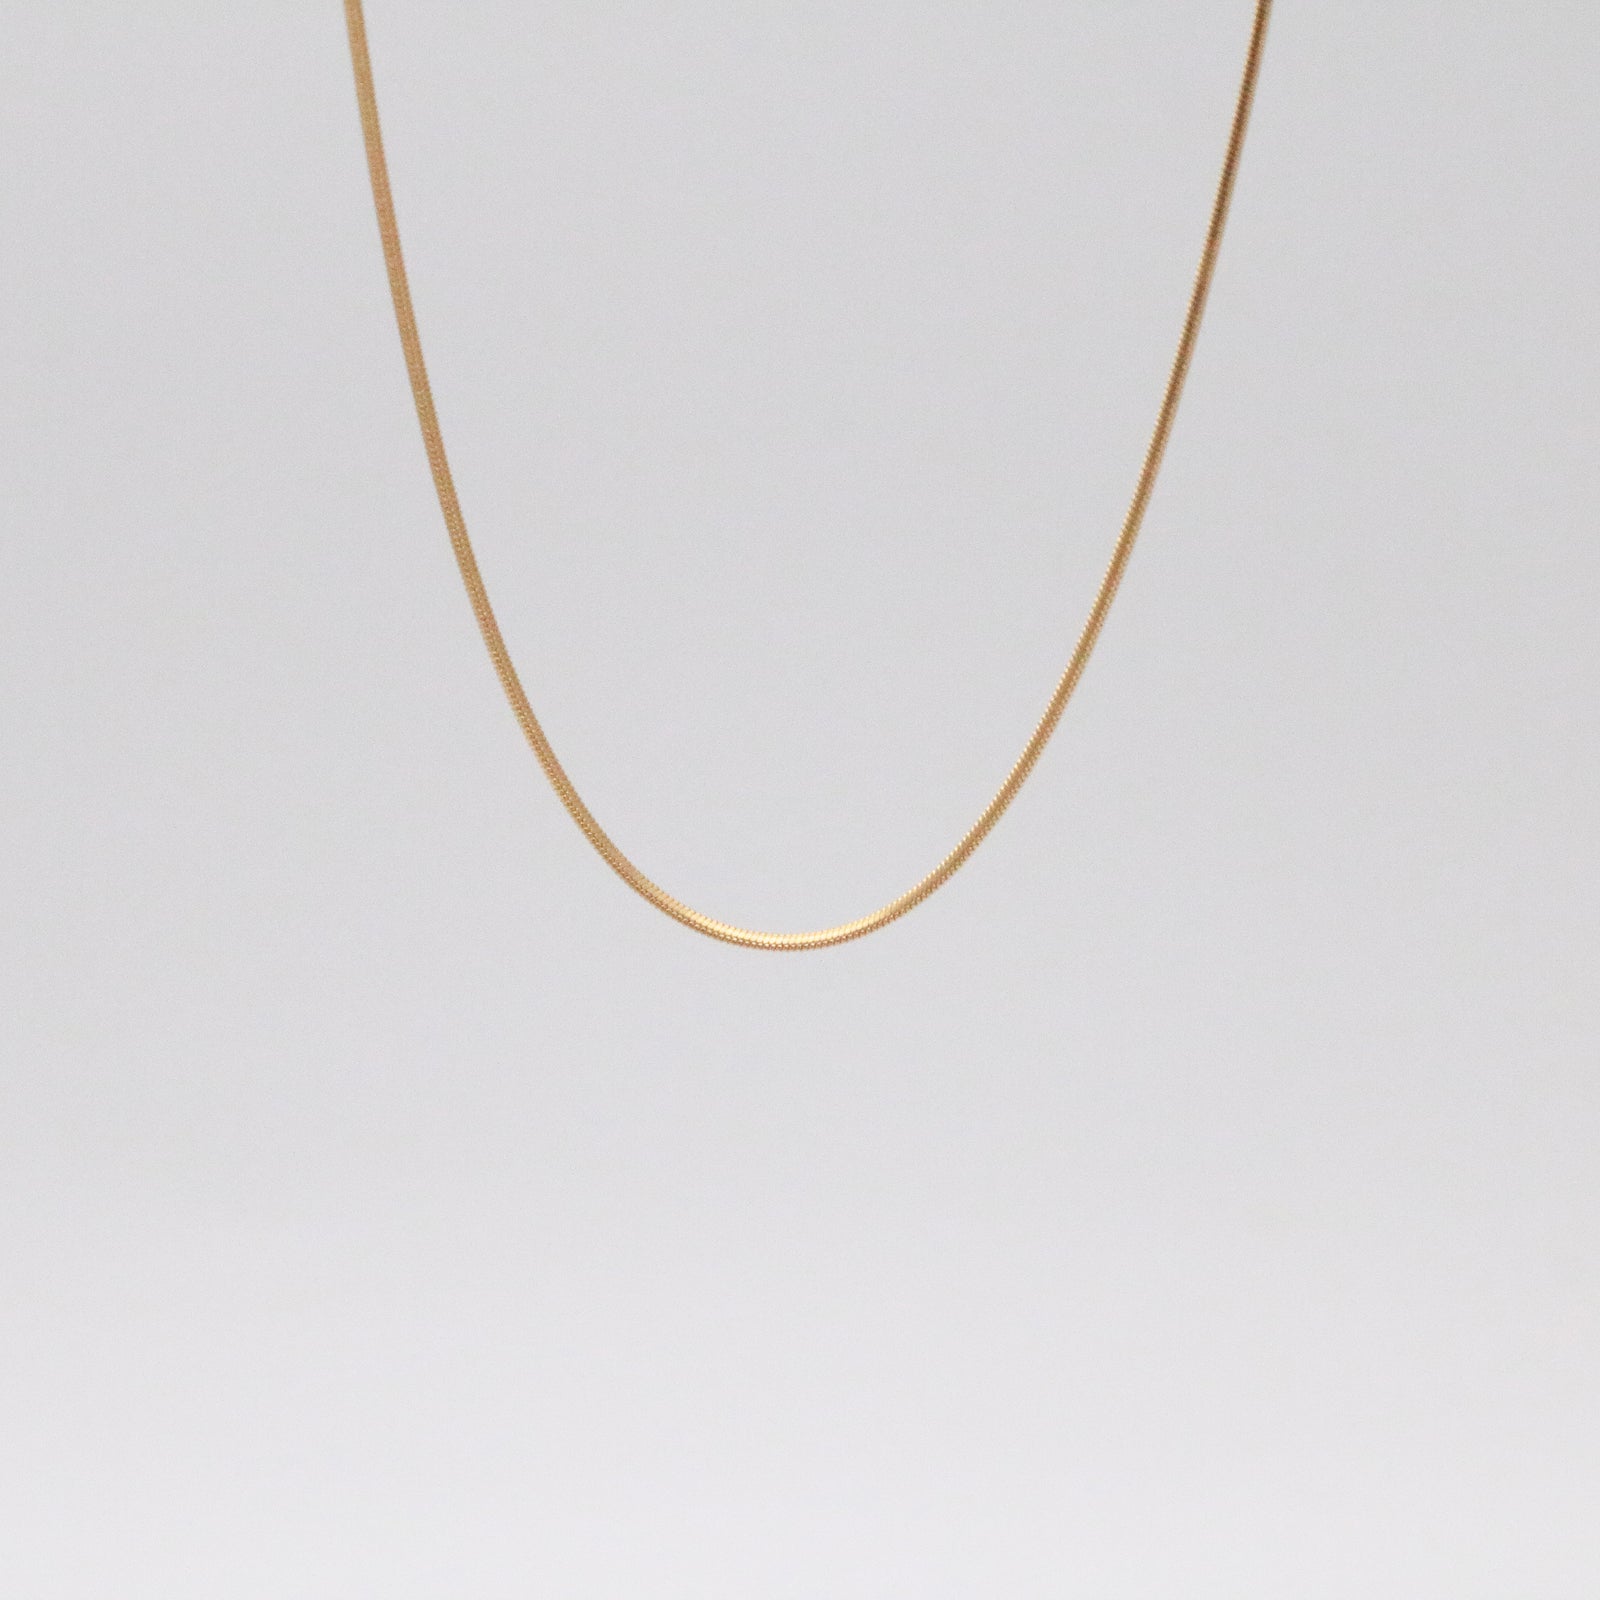 Shimmer thin gold chain necklace